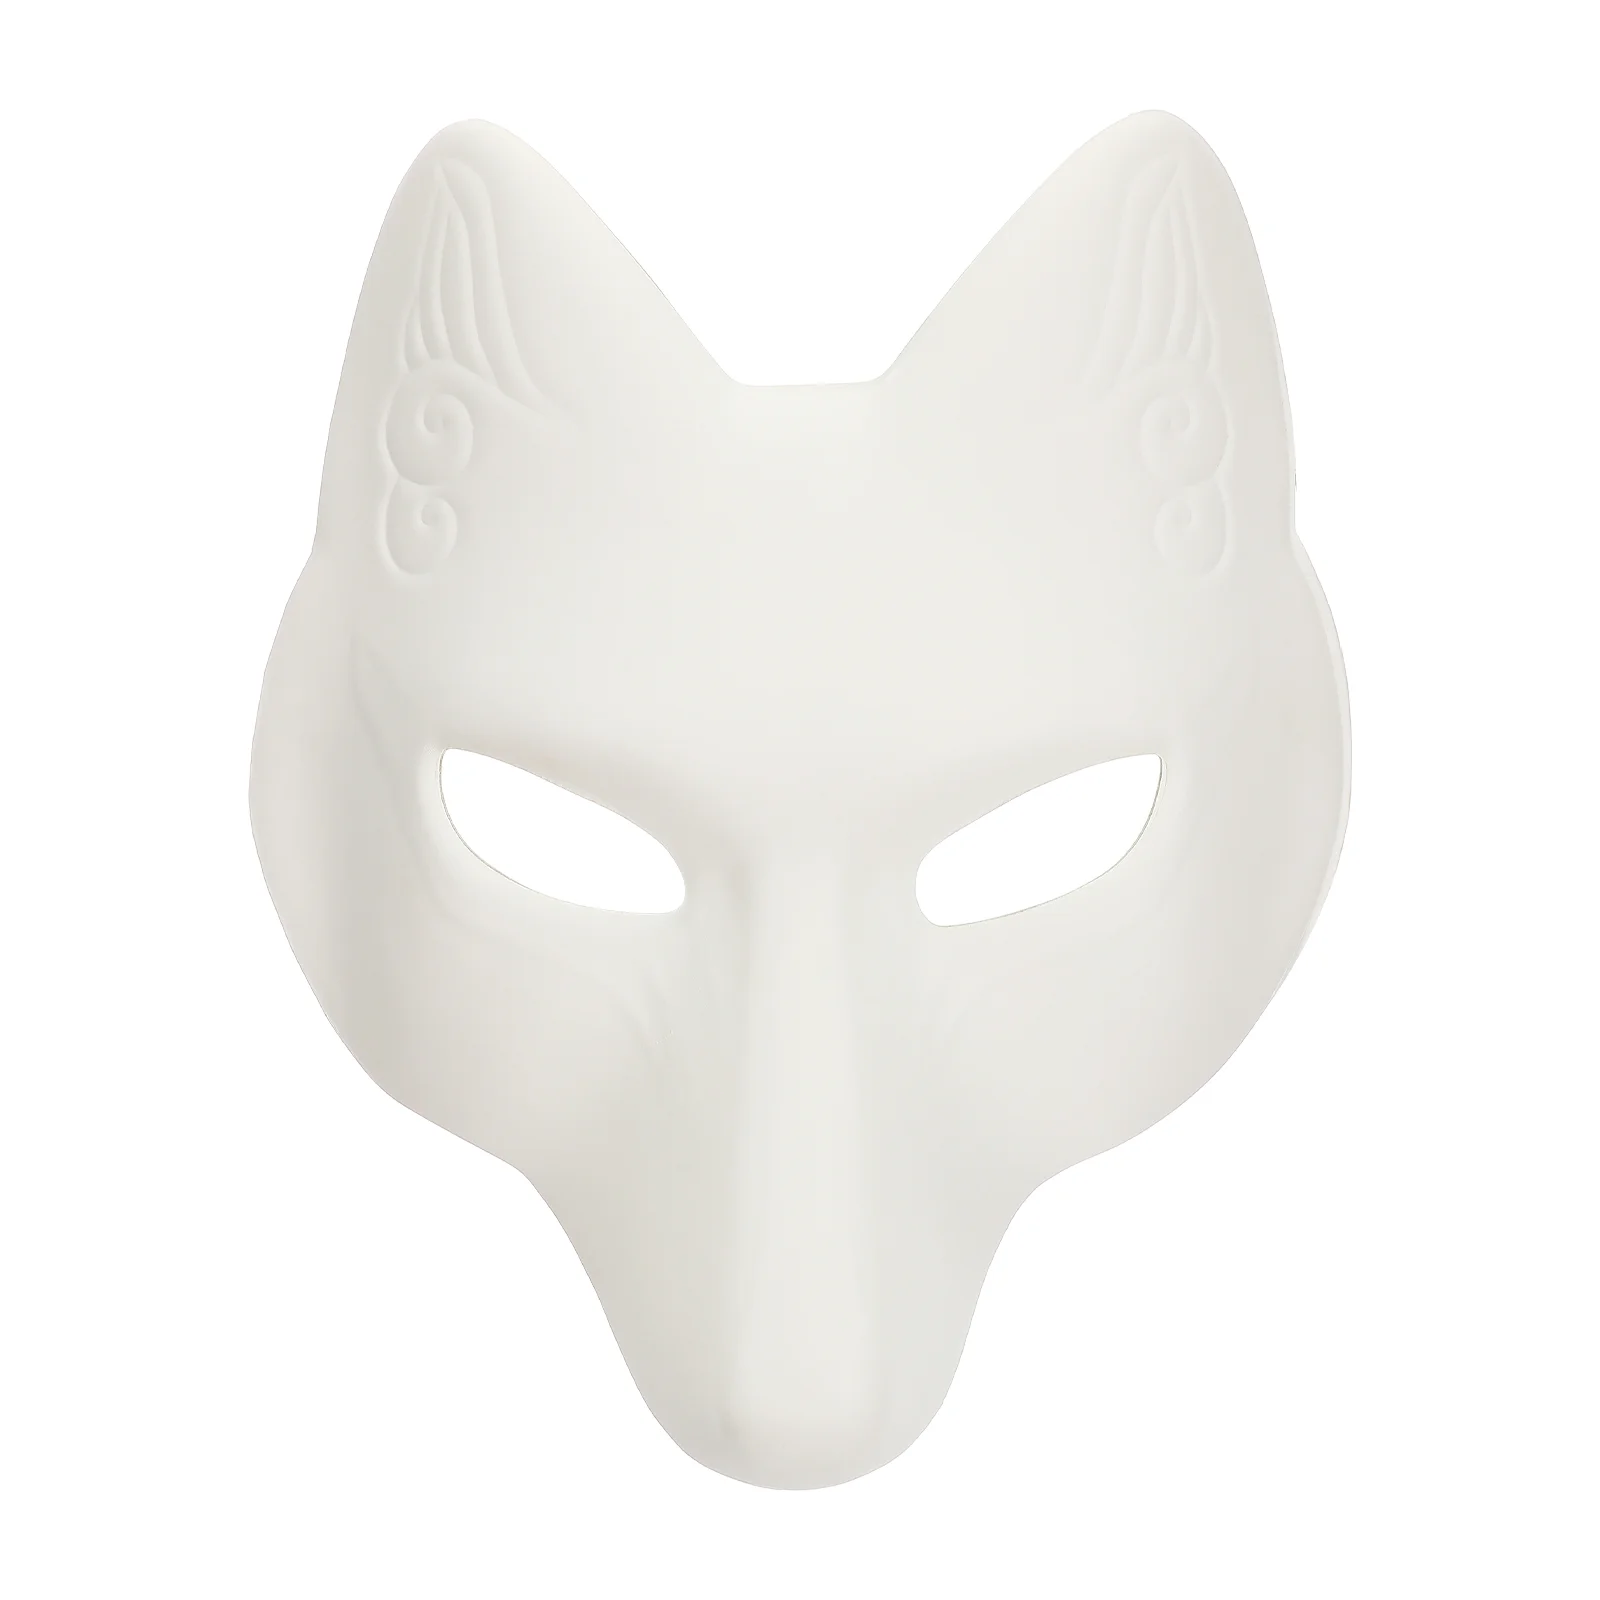 

Masks Mask Halloween Cosplay White Cat Up Diy Dress Masquerade Costume Accessories Therian Party Wolf Blank Unpainted Face Mardi